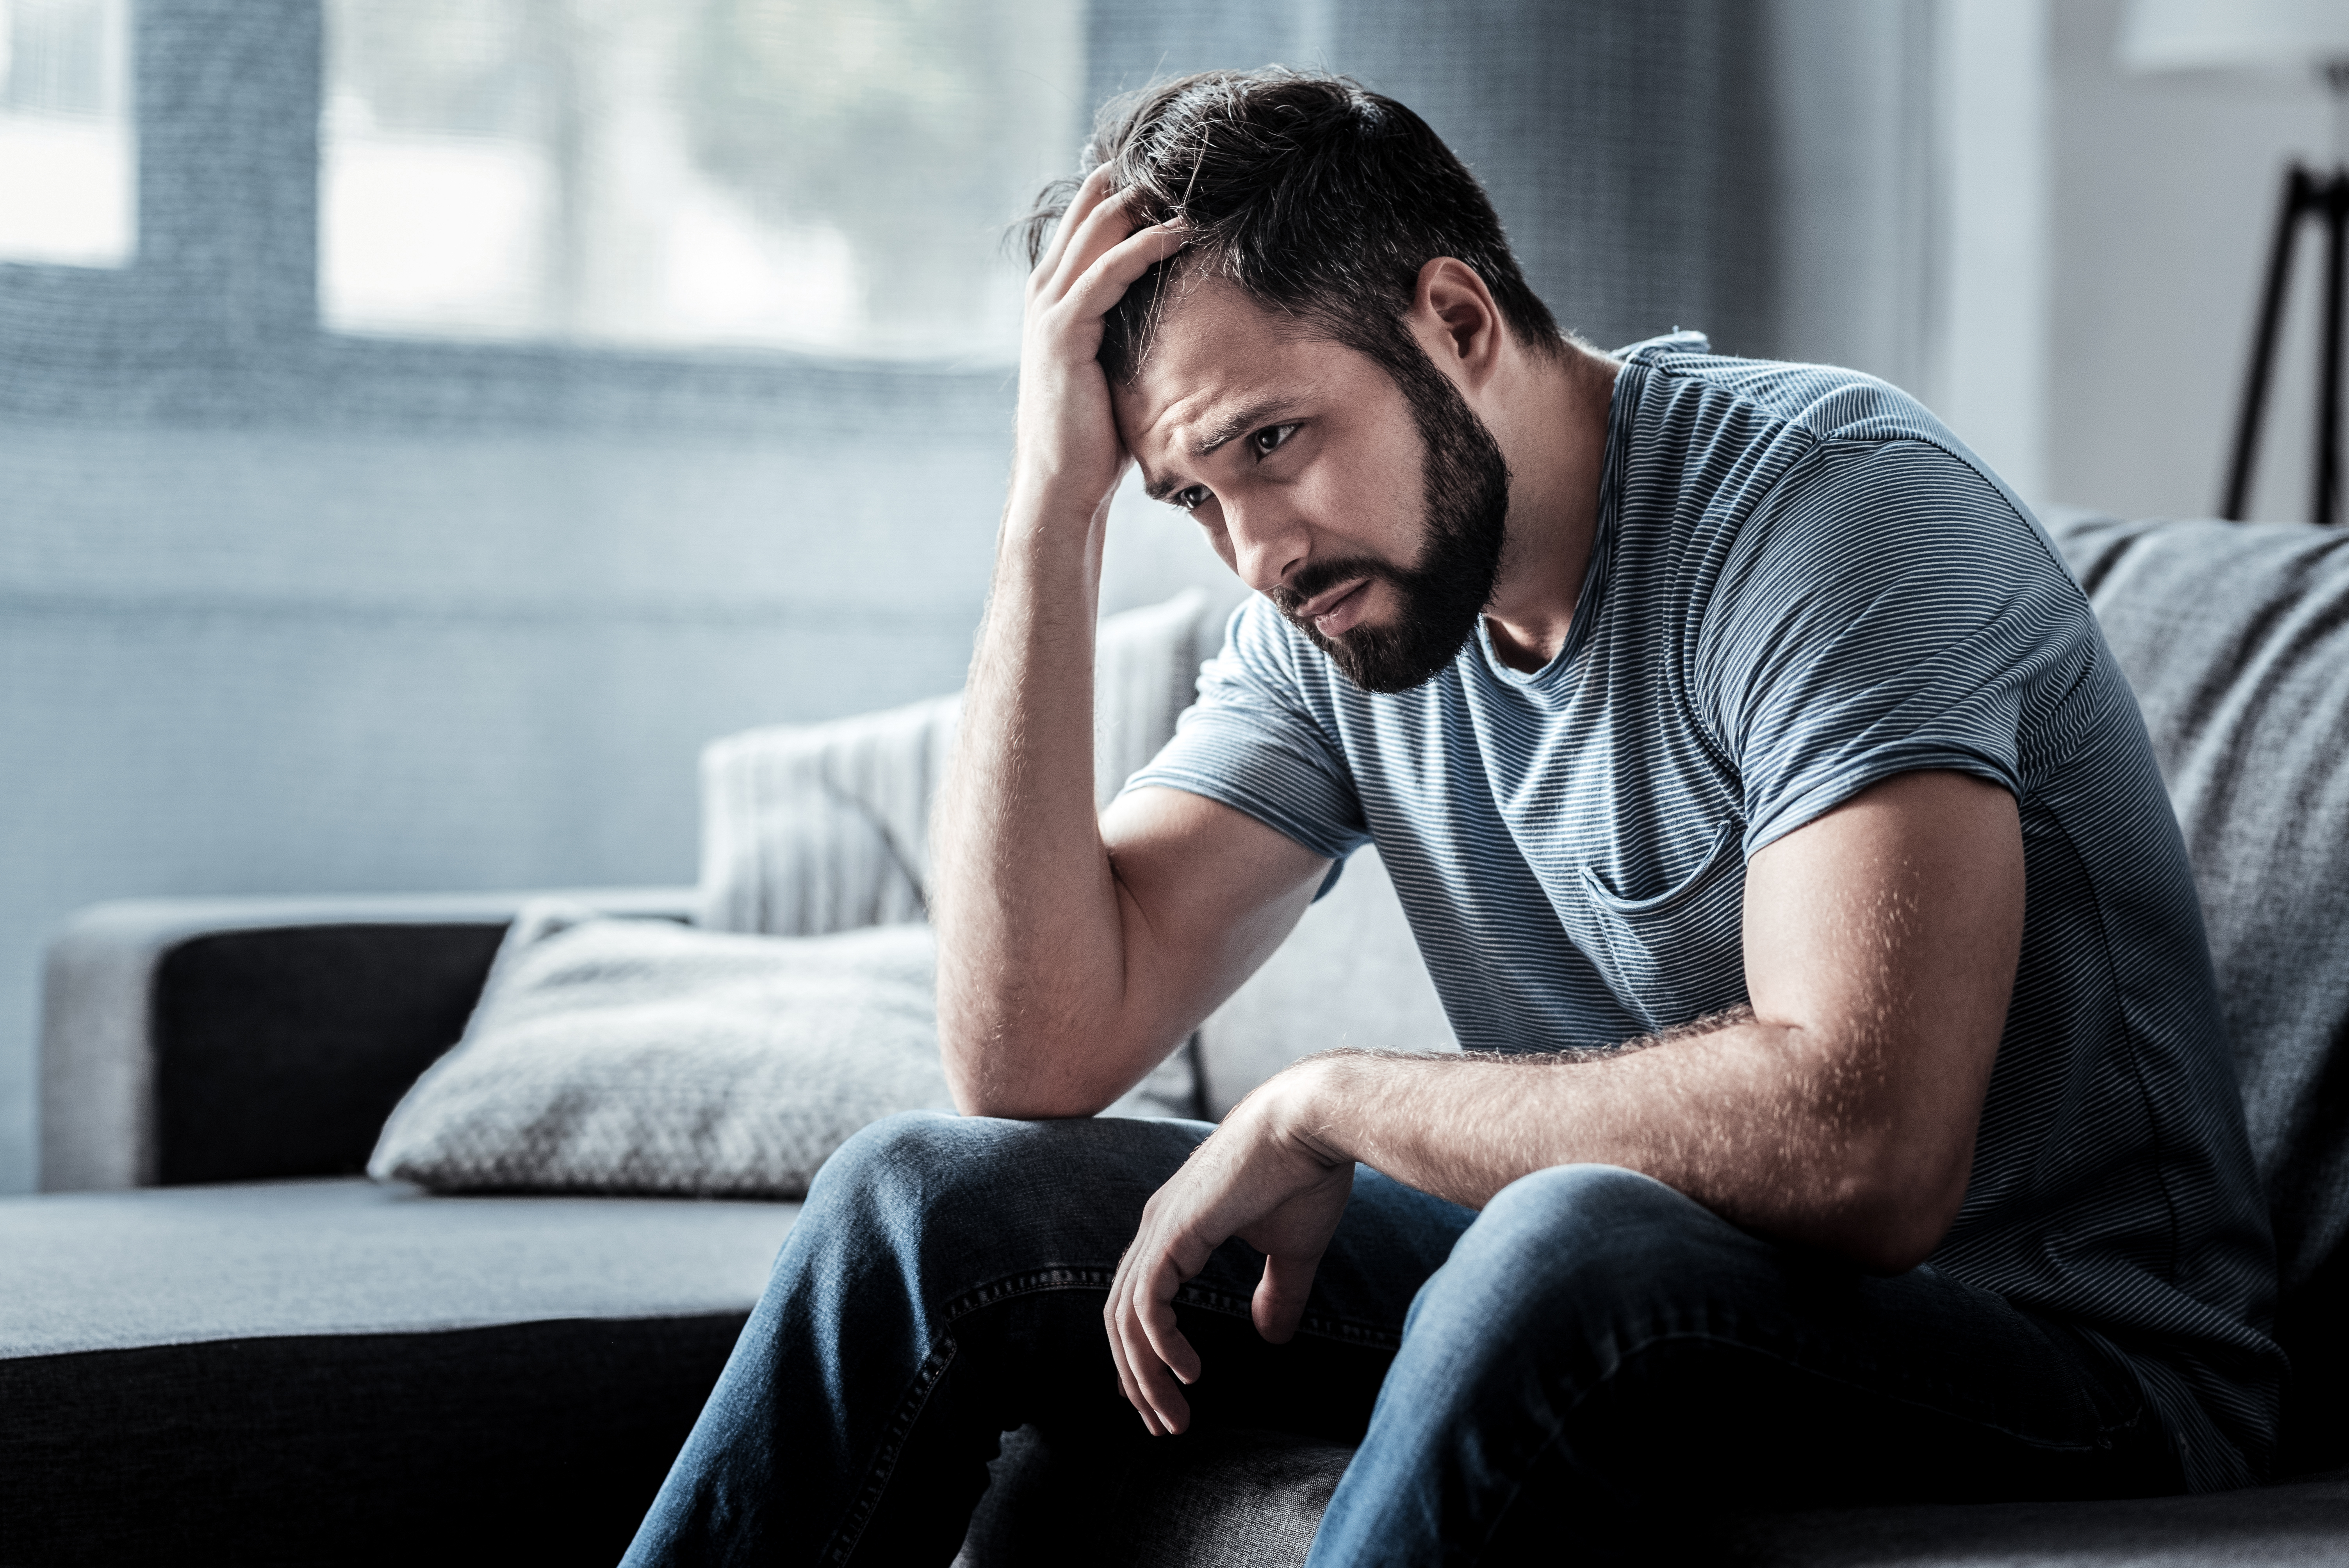 An upset man sitting on a couch | Source: Shutterstock